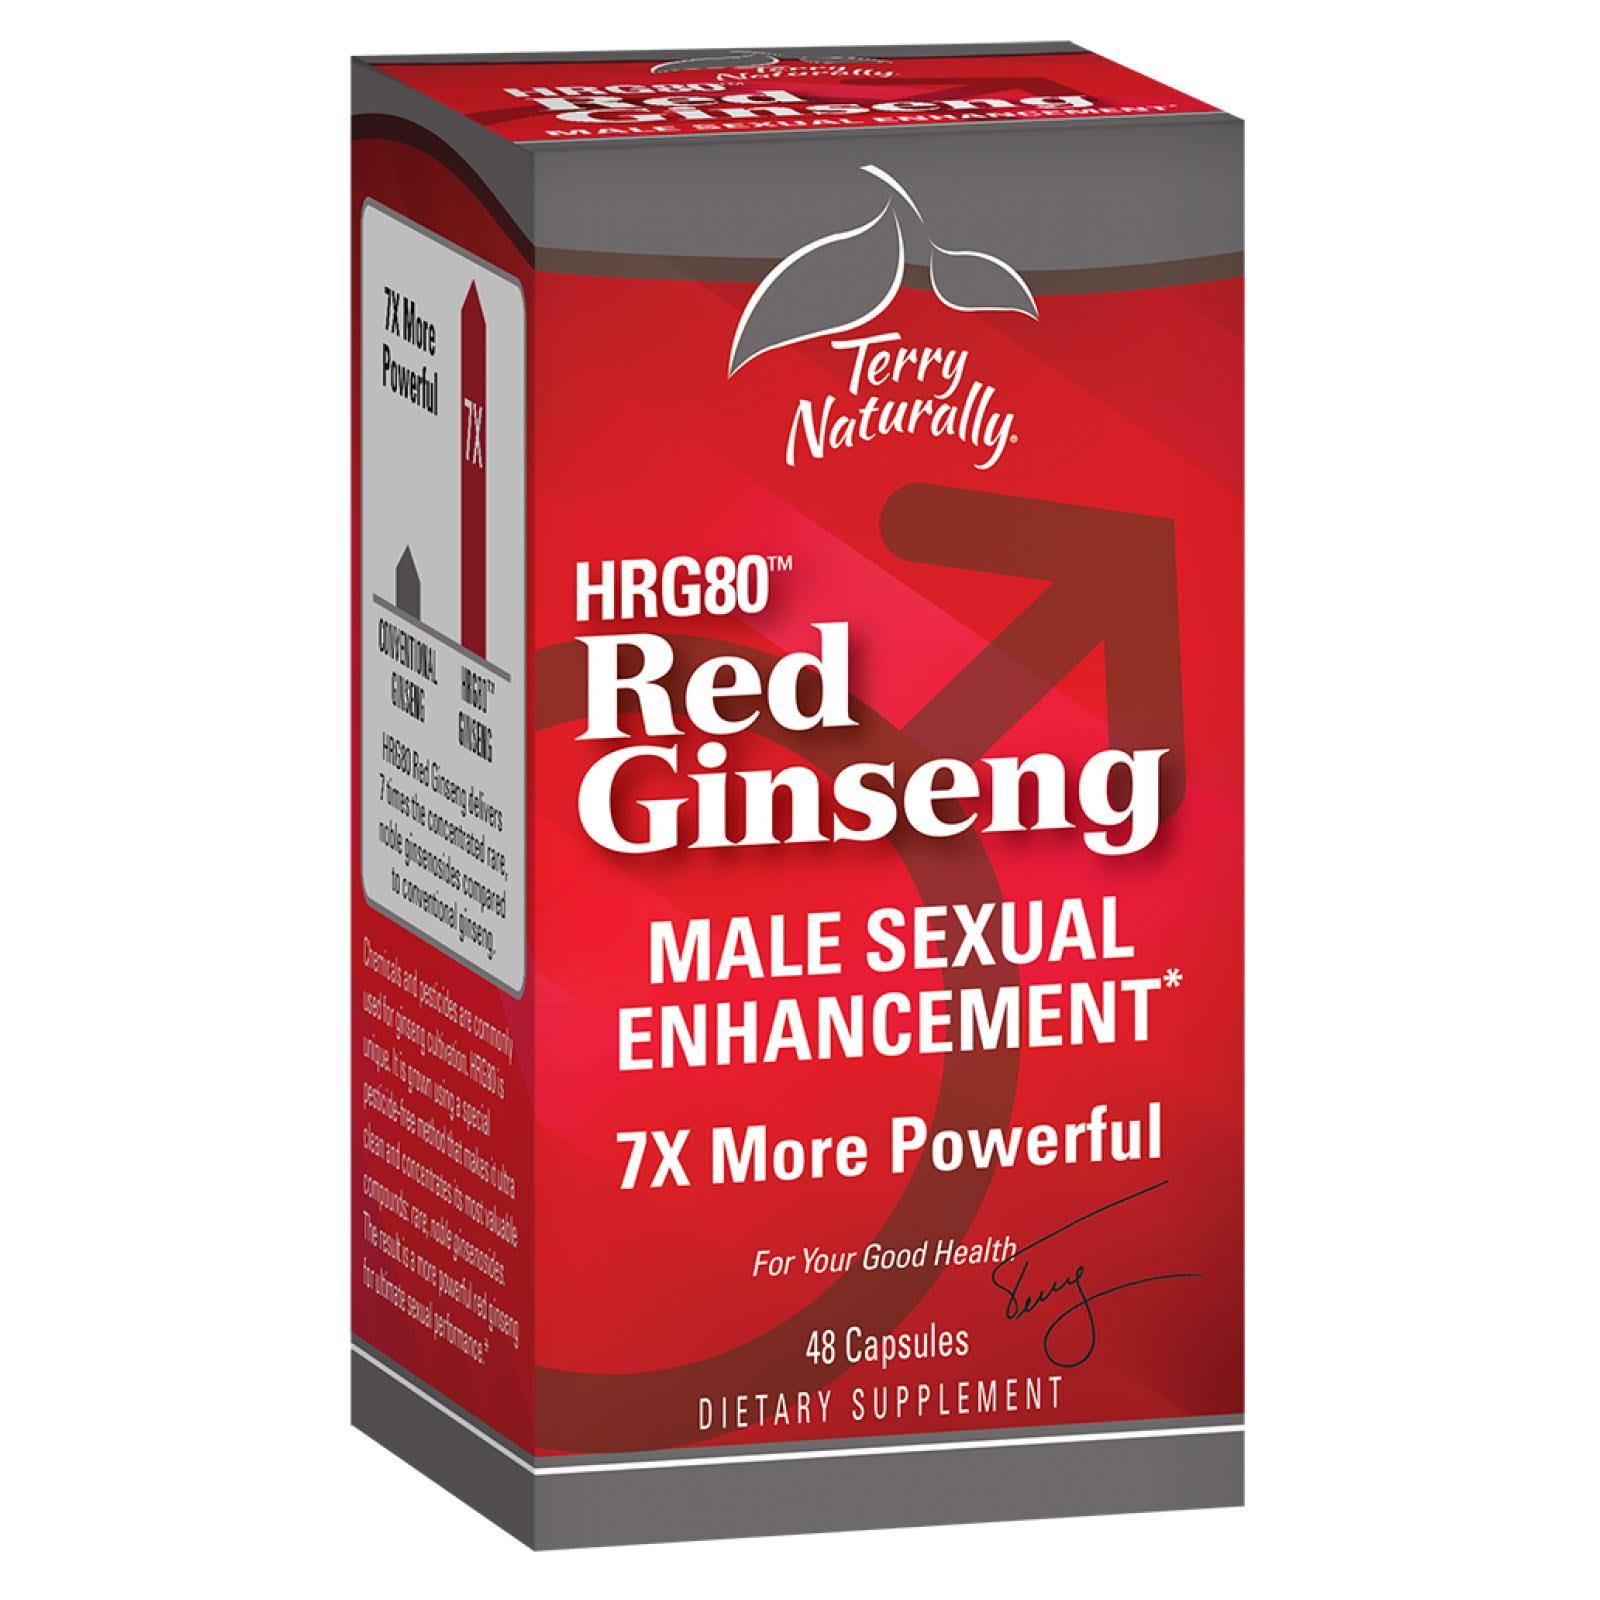 Terry Naturally HRG80 Red Ginseng Male Enhancement 48 Capsules | by NetNutri